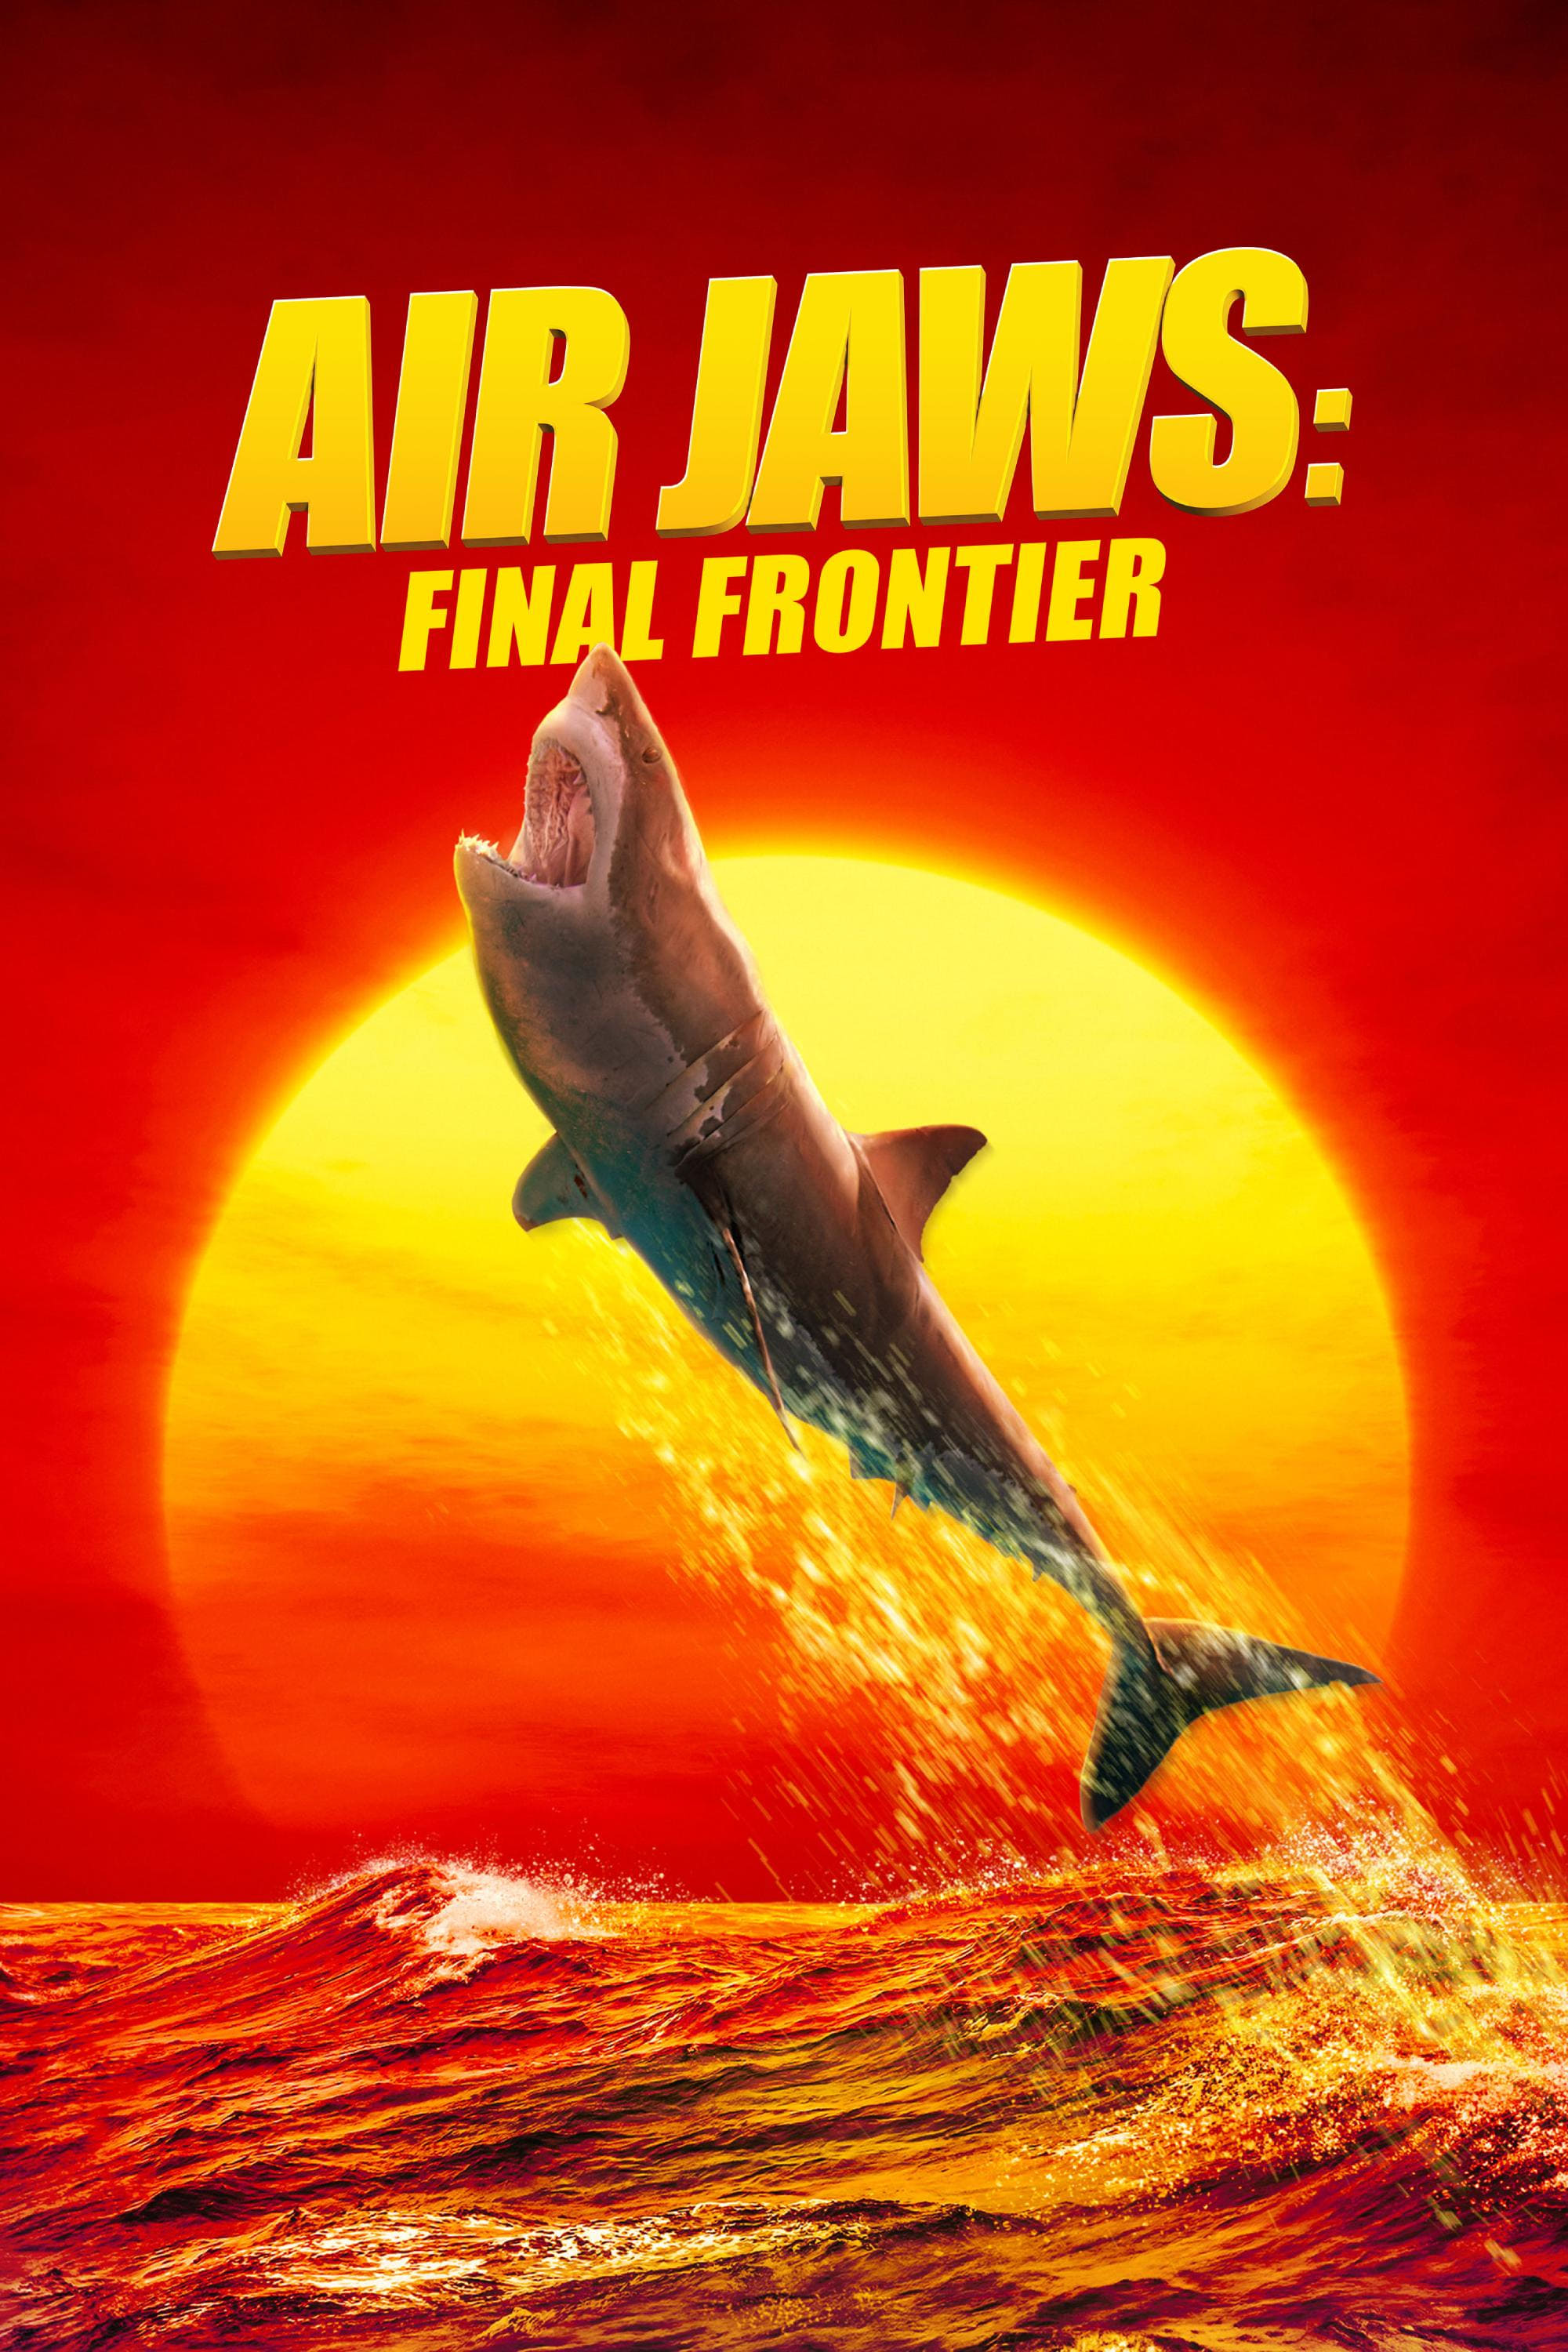 Air Jaws: Final Frontier